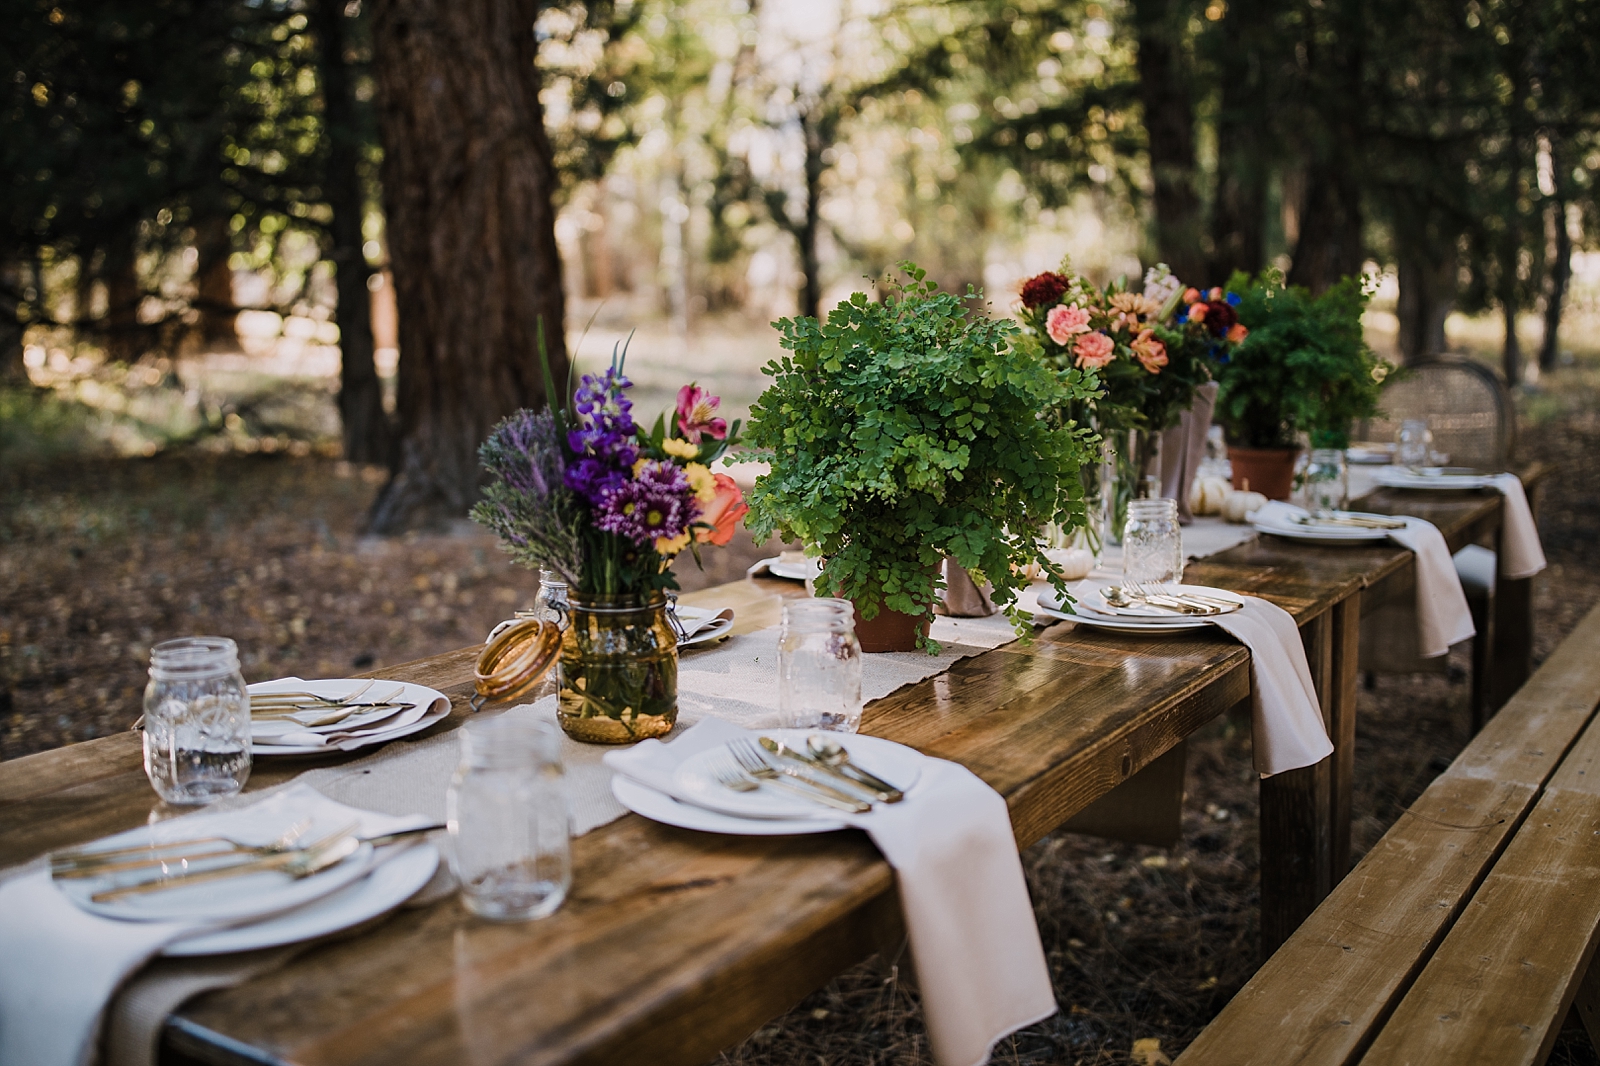 dinner table in the woods, post elopement celebration, wedding in the woods, buena vista elopement, buena vista wedding, nathrop colorado wedding, adventurous colorado elopement, bv farmers market